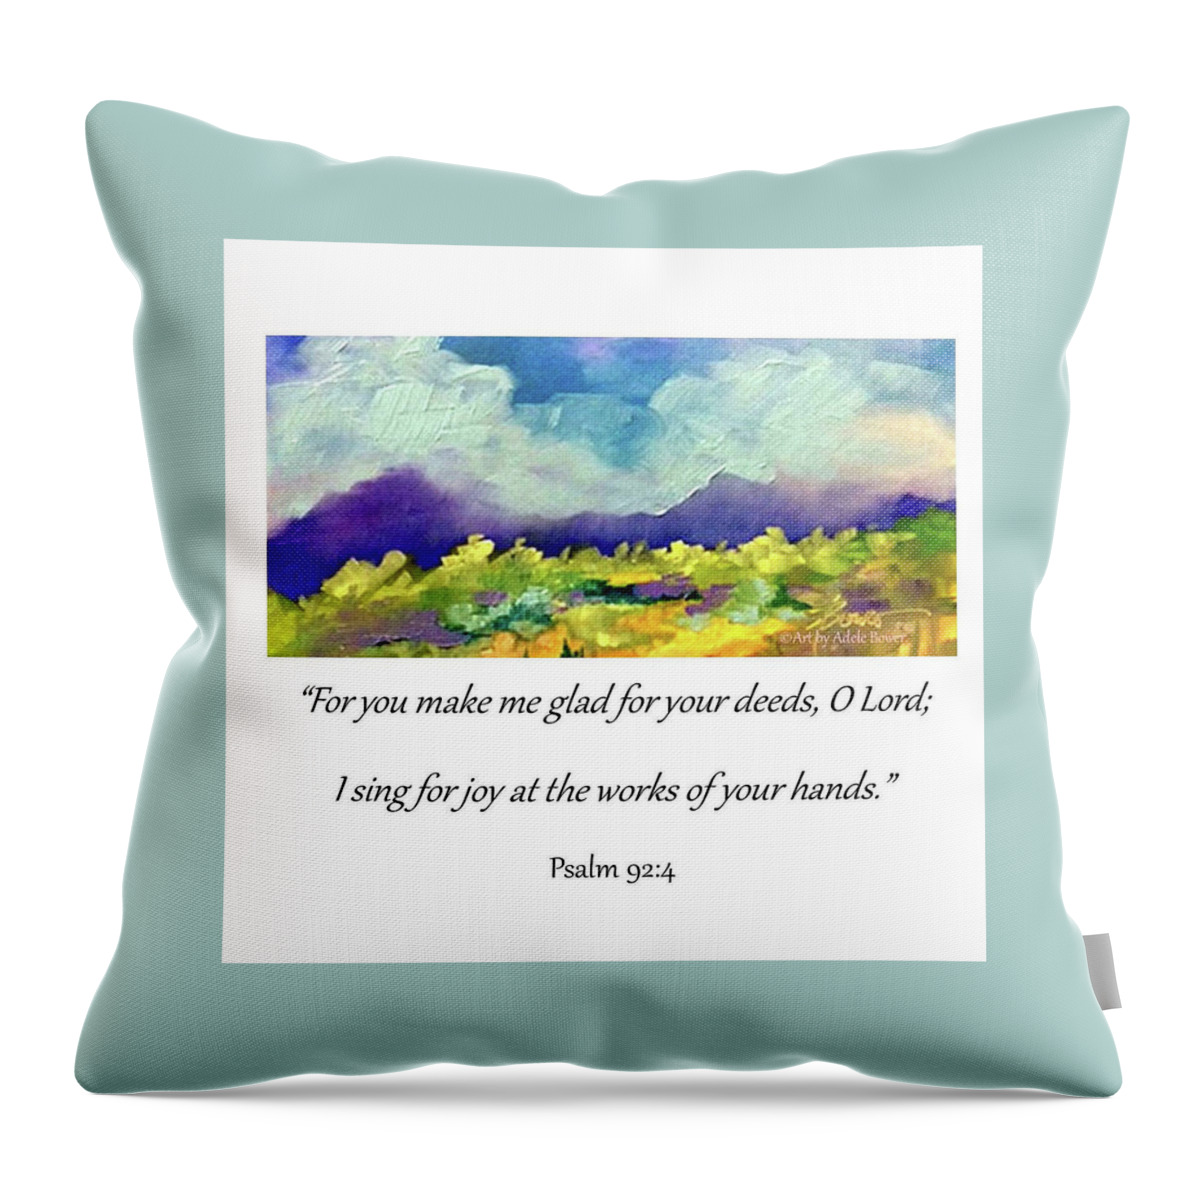 Scripture Throw Pillow featuring the painting I Sing For Joy by Adele Bower